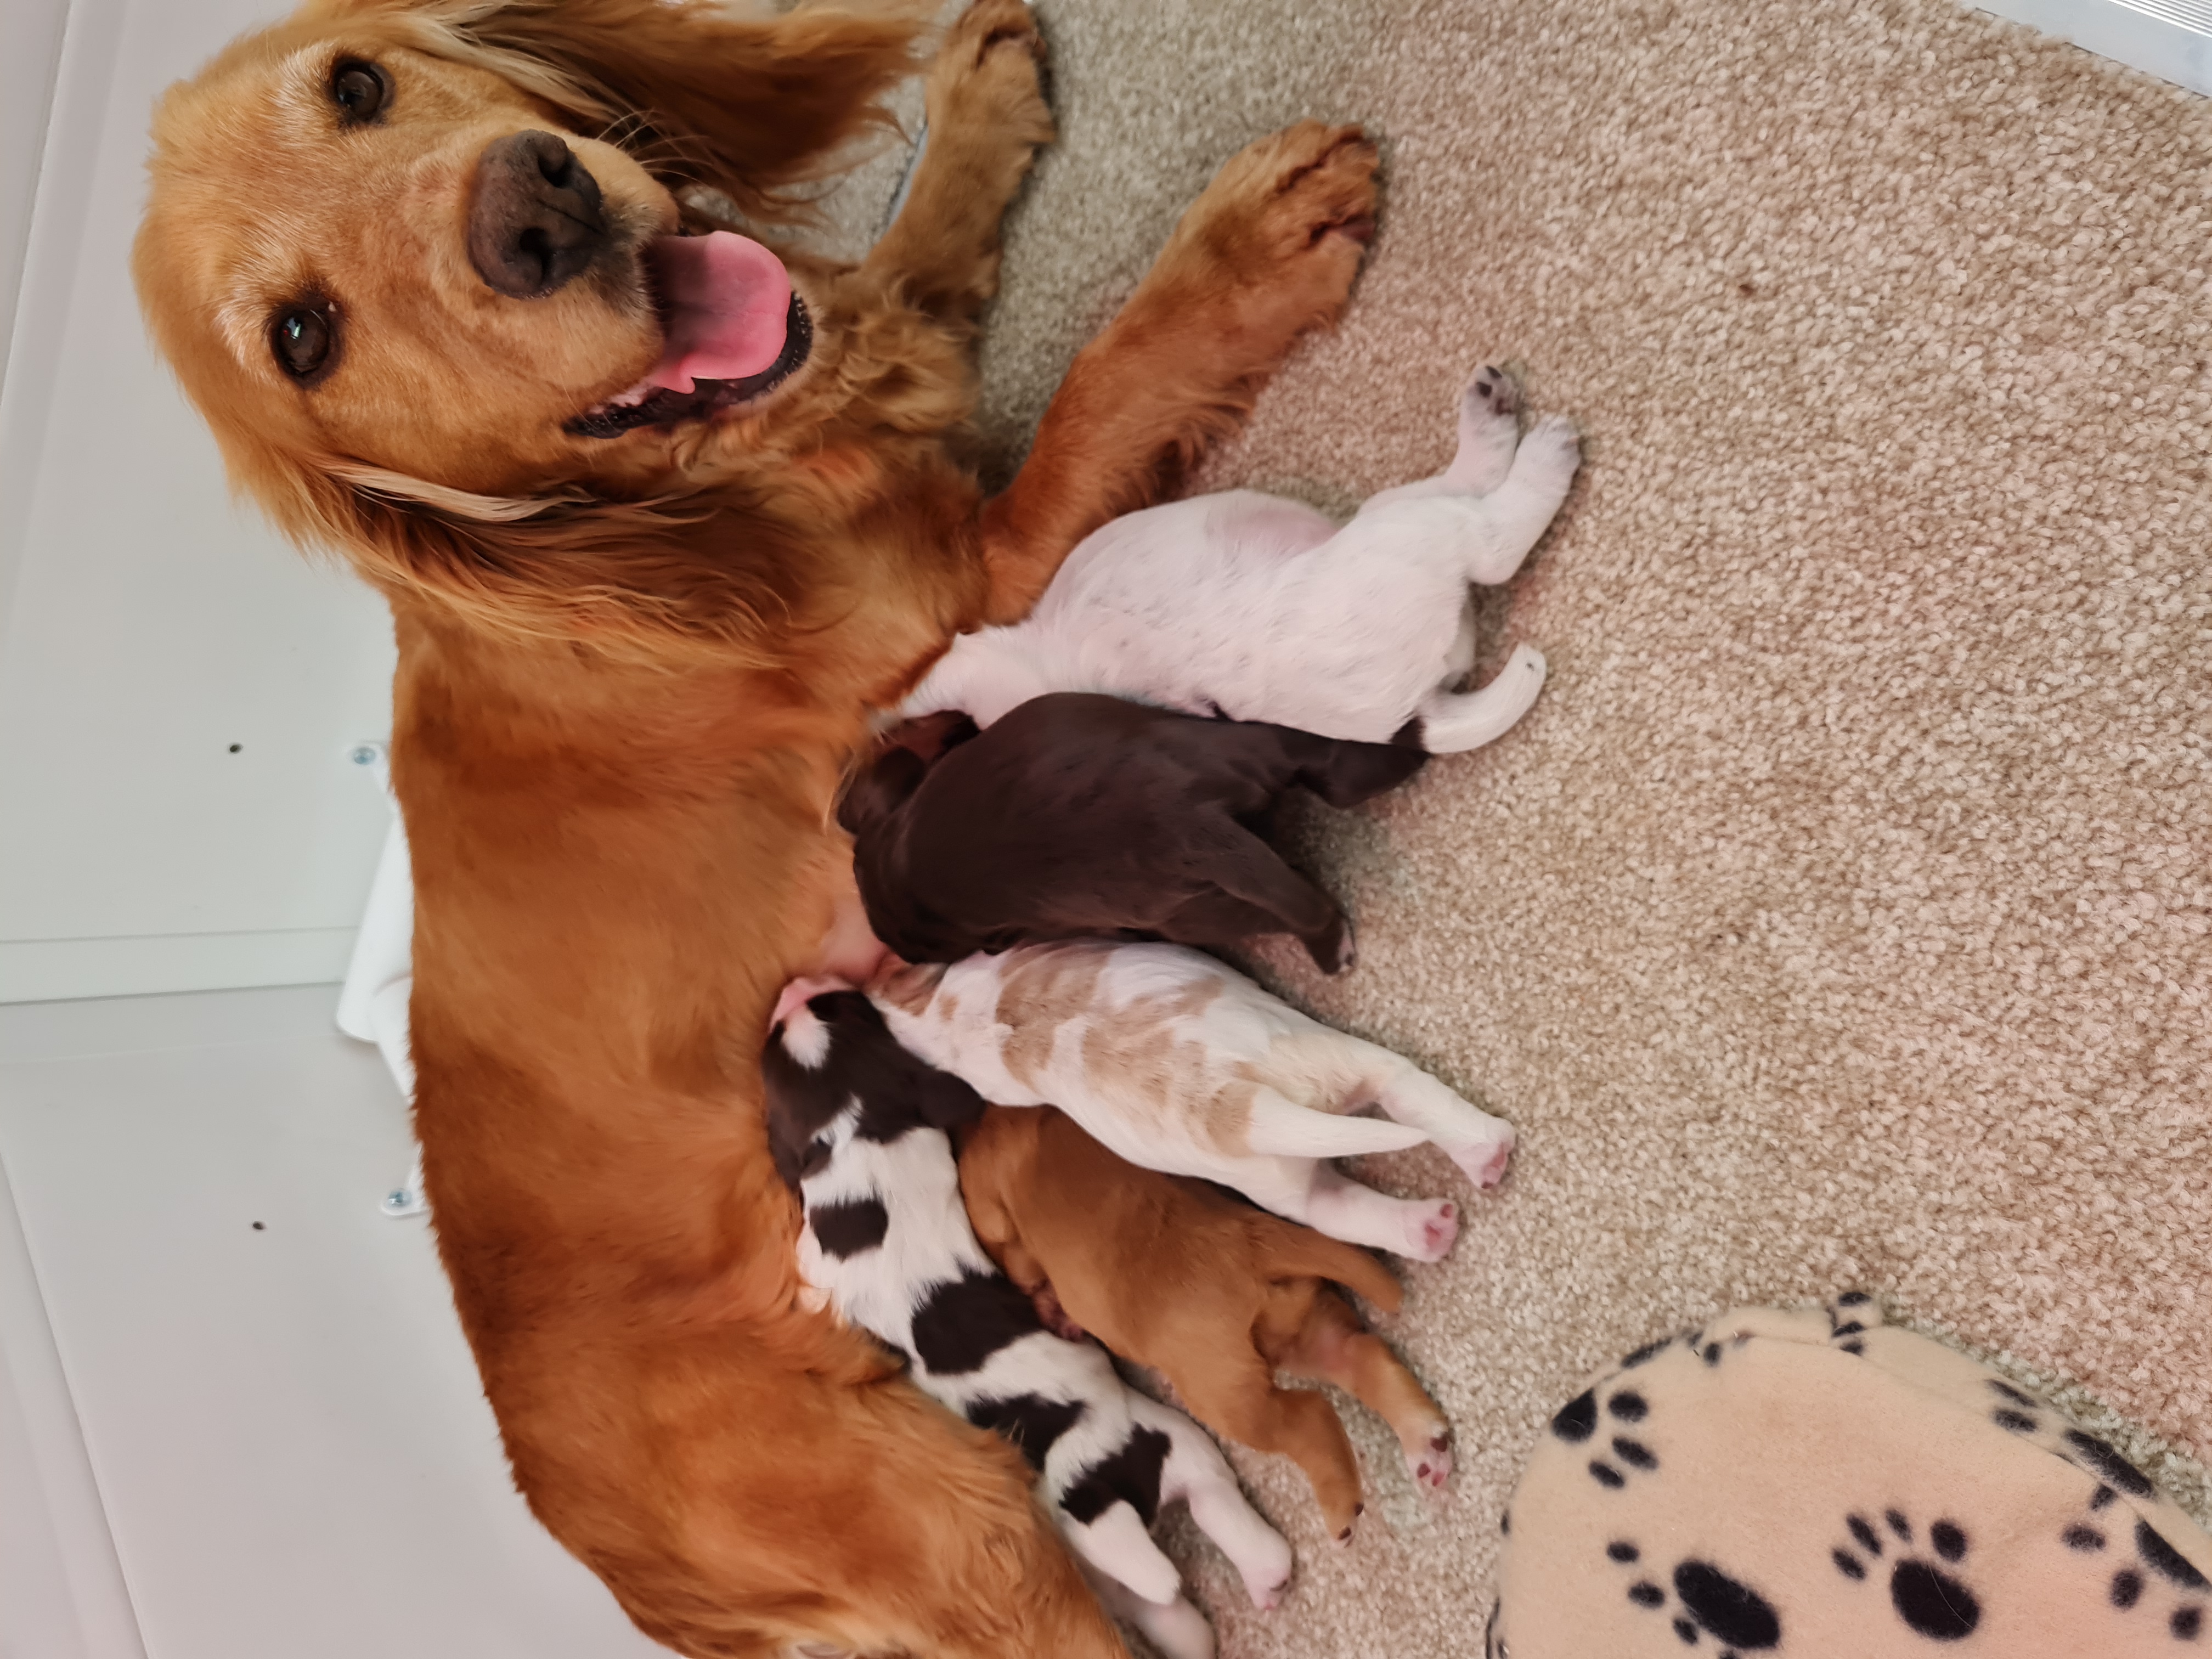 Peanut with her pups 